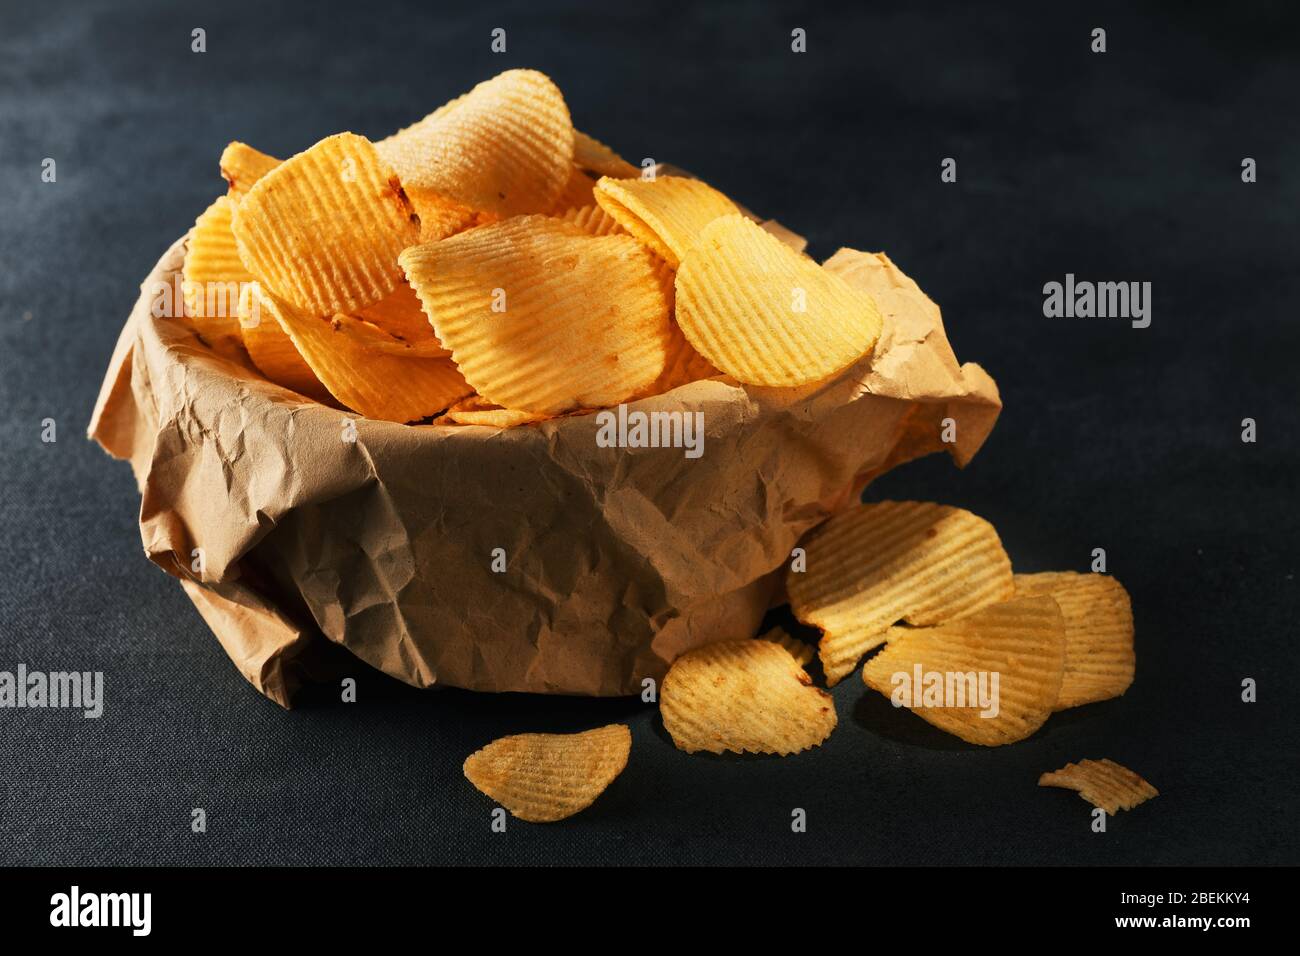 Download Potato Chip Bag High Resolution Stock Photography And Images Alamy Yellowimages Mockups